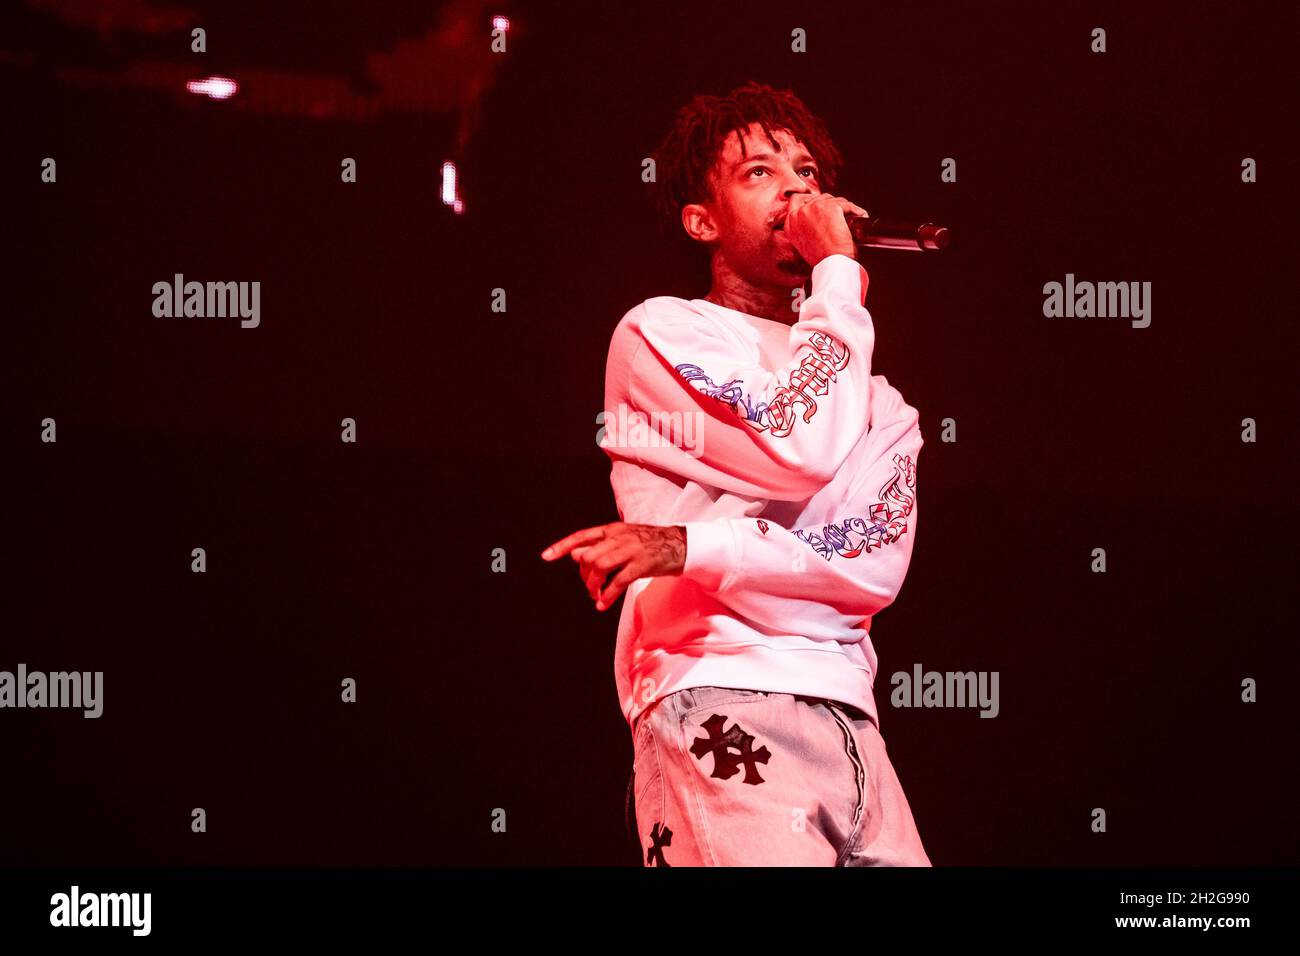 Download 21 Savage performing at the Devastation Tour in Houston, TX